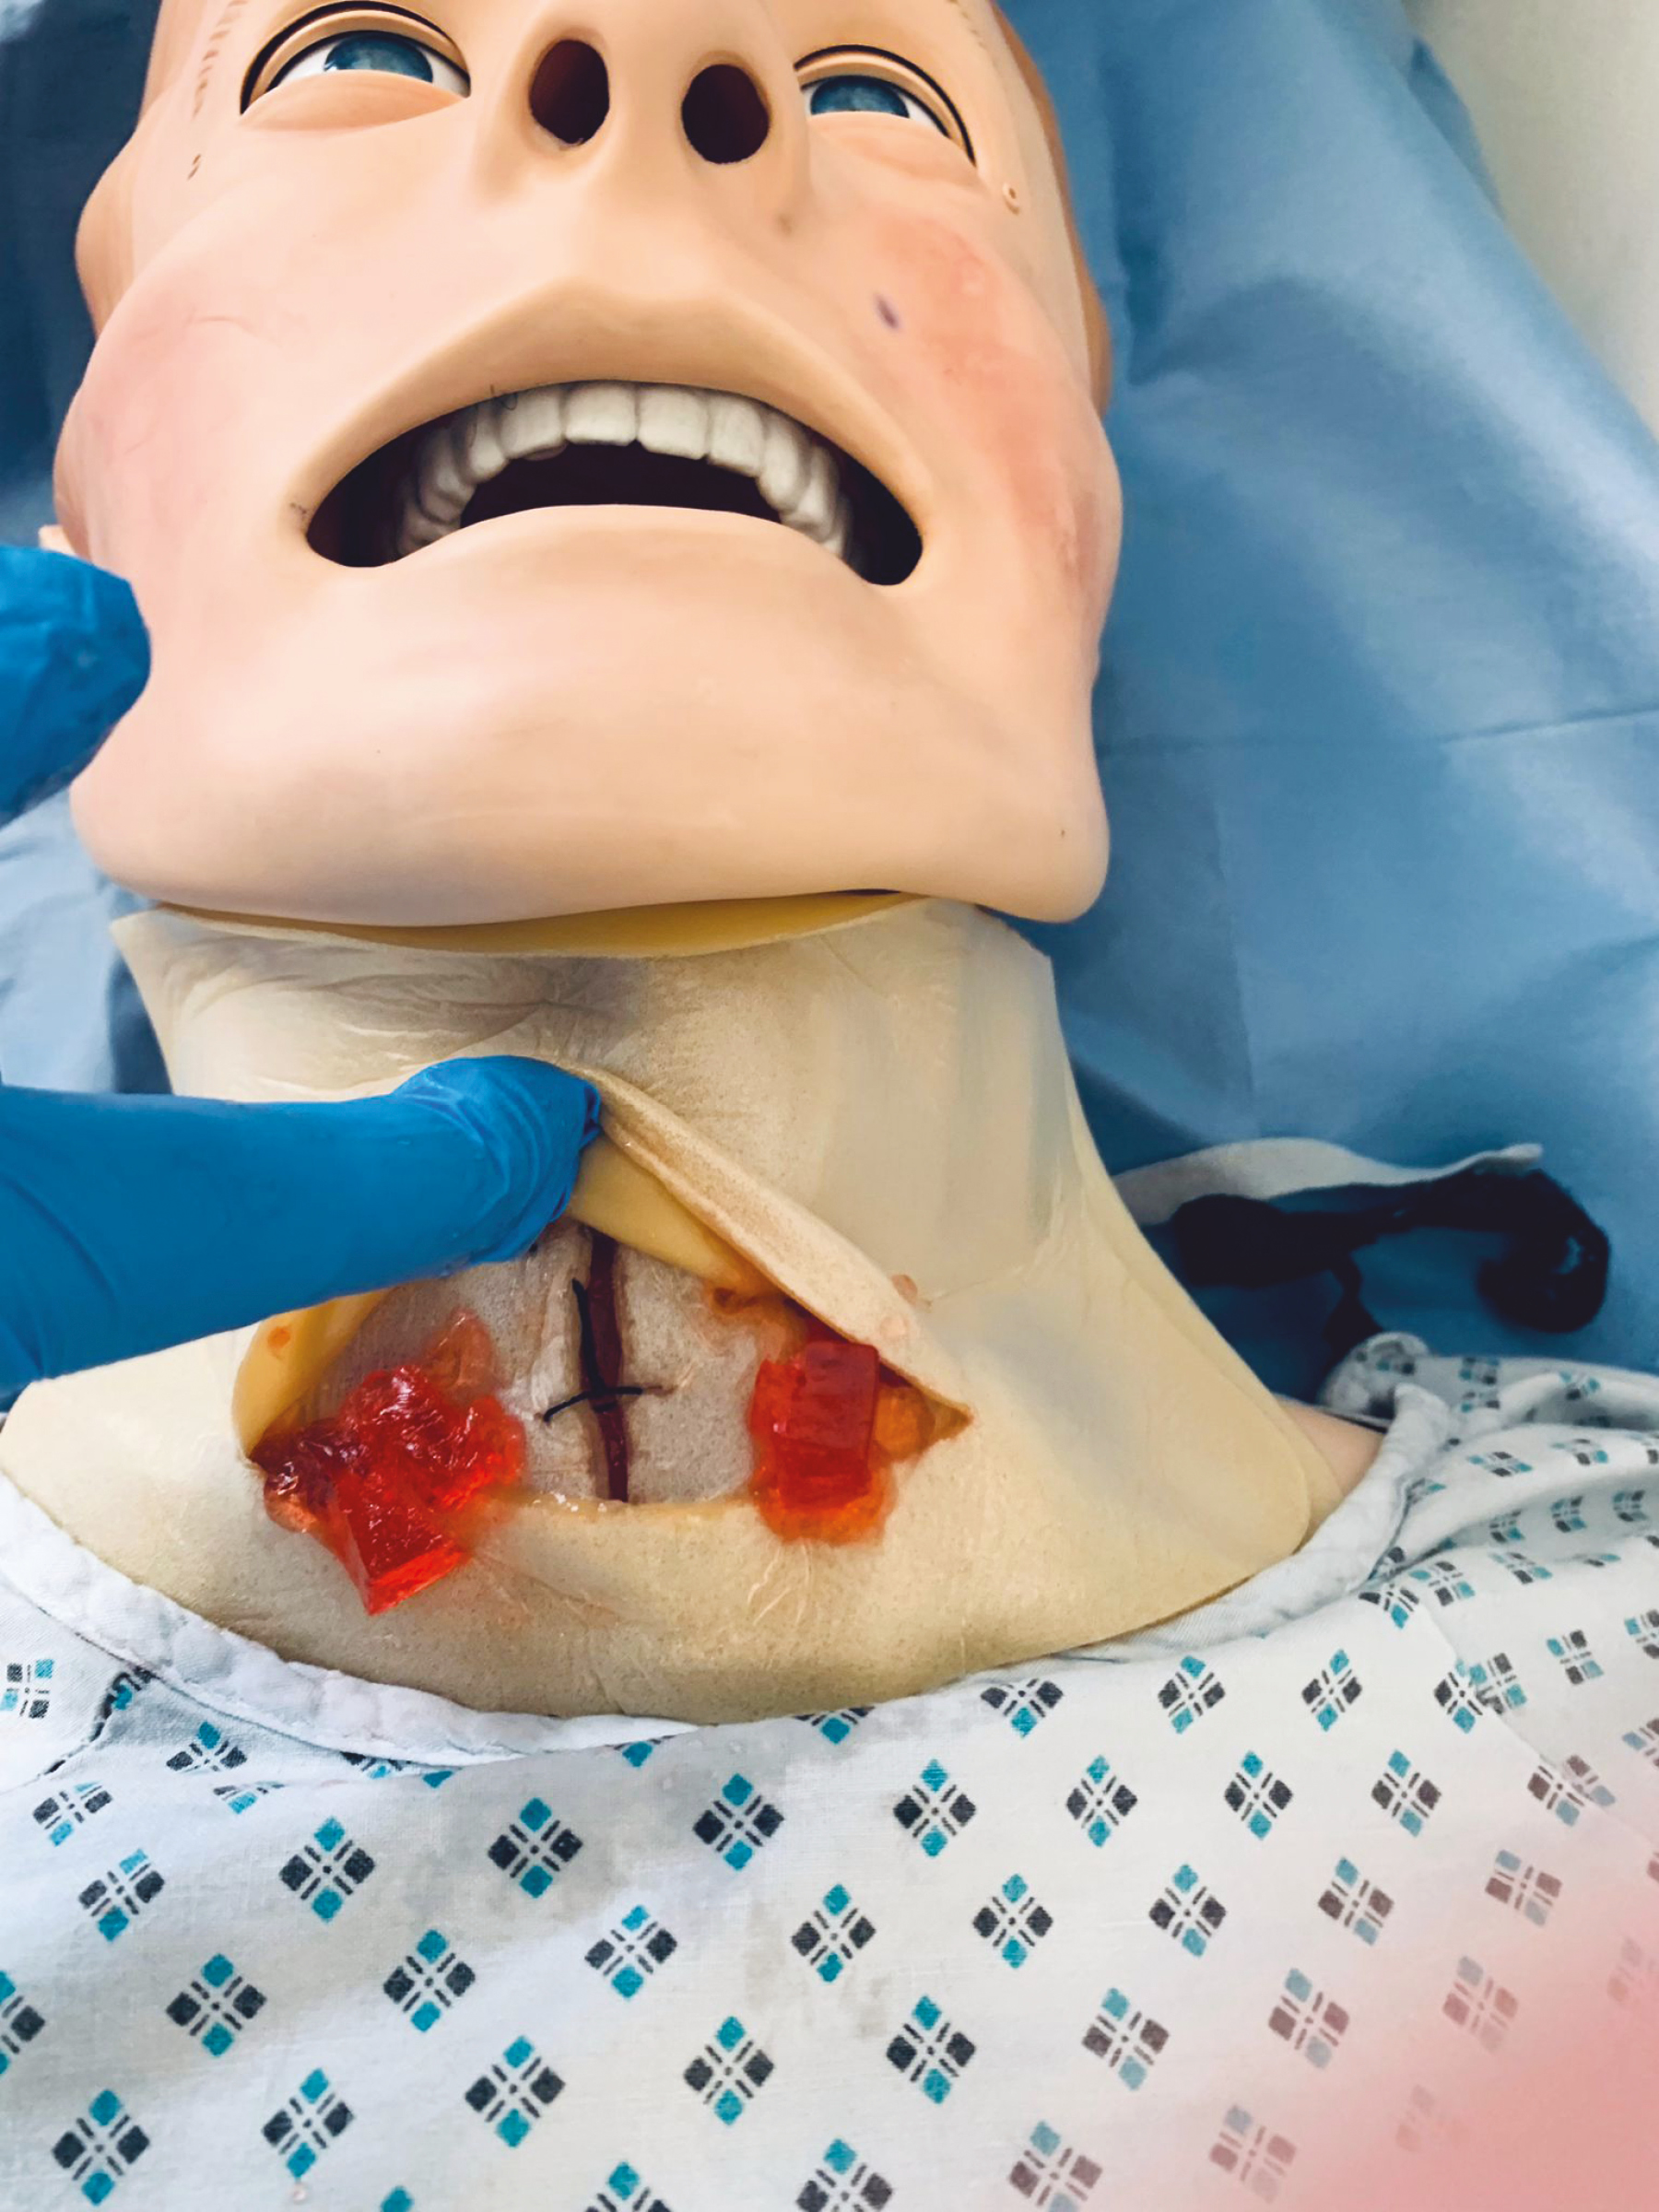 Manikin with neck haematoma demonstrated by two layers of dressings sutured together and use of jelly to simulate clotted blood.